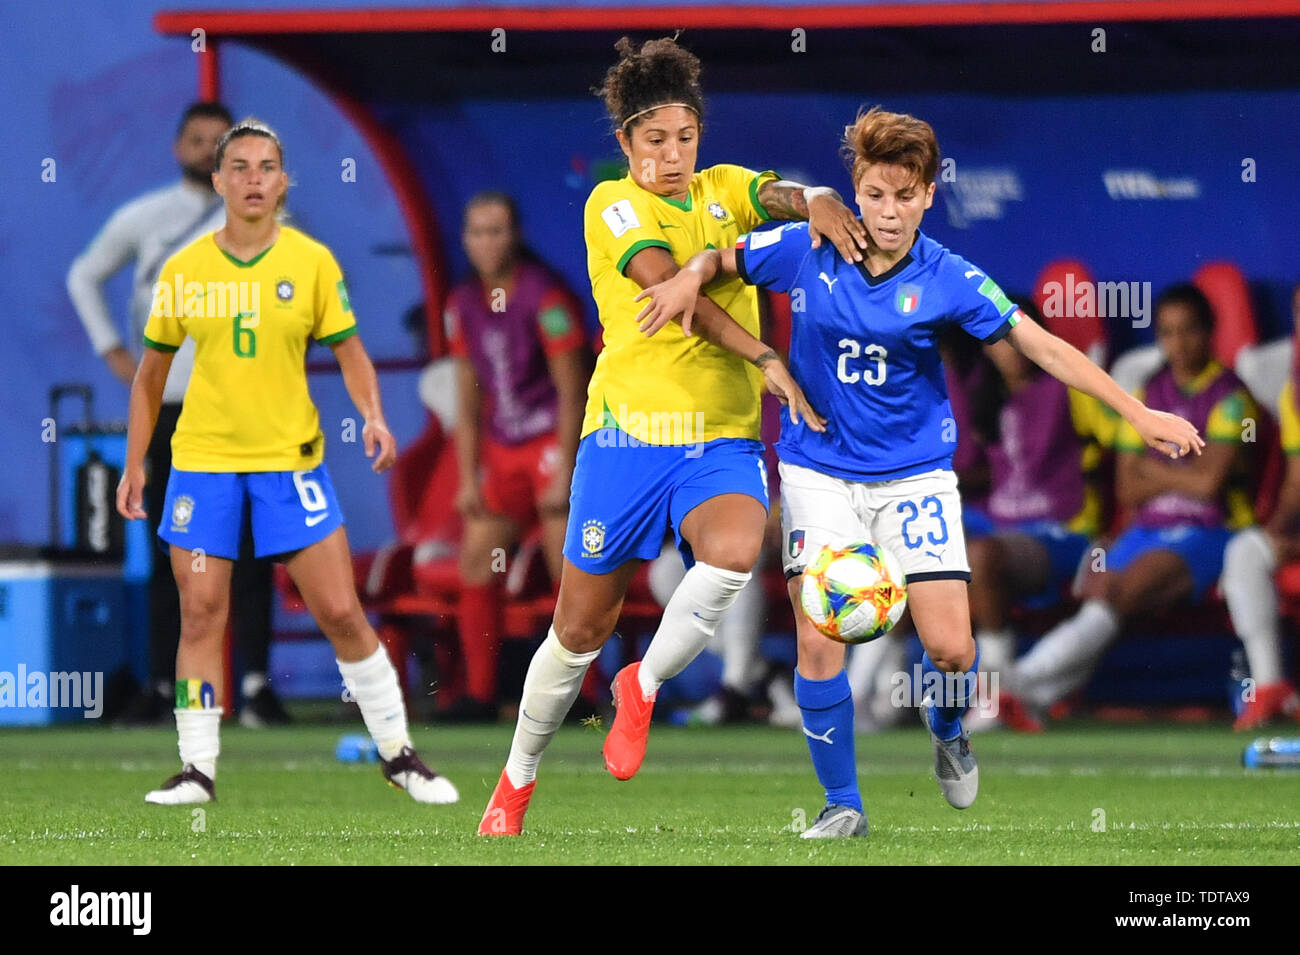 Valenciennes, Frankreich. 18th June, 2019. duels, match scene, duel, duel, tackle, tackling, momentum, action to the ball Cristiane (Brazil) (11) Manuela Giugliano (Italy) (23), 18.06.2019, Valenciennes (France), football, FIFA Women's World Cup 2019, Italy - Brazil, FIFA REGULATIONS PROHIBIT ANY USE OF PHOTOGRAPHS AS IMAGE SEQUENCES AND/OR QUASI VIDEO. | usage worldwide Credit: dpa/Alamy Live News Stock Photo